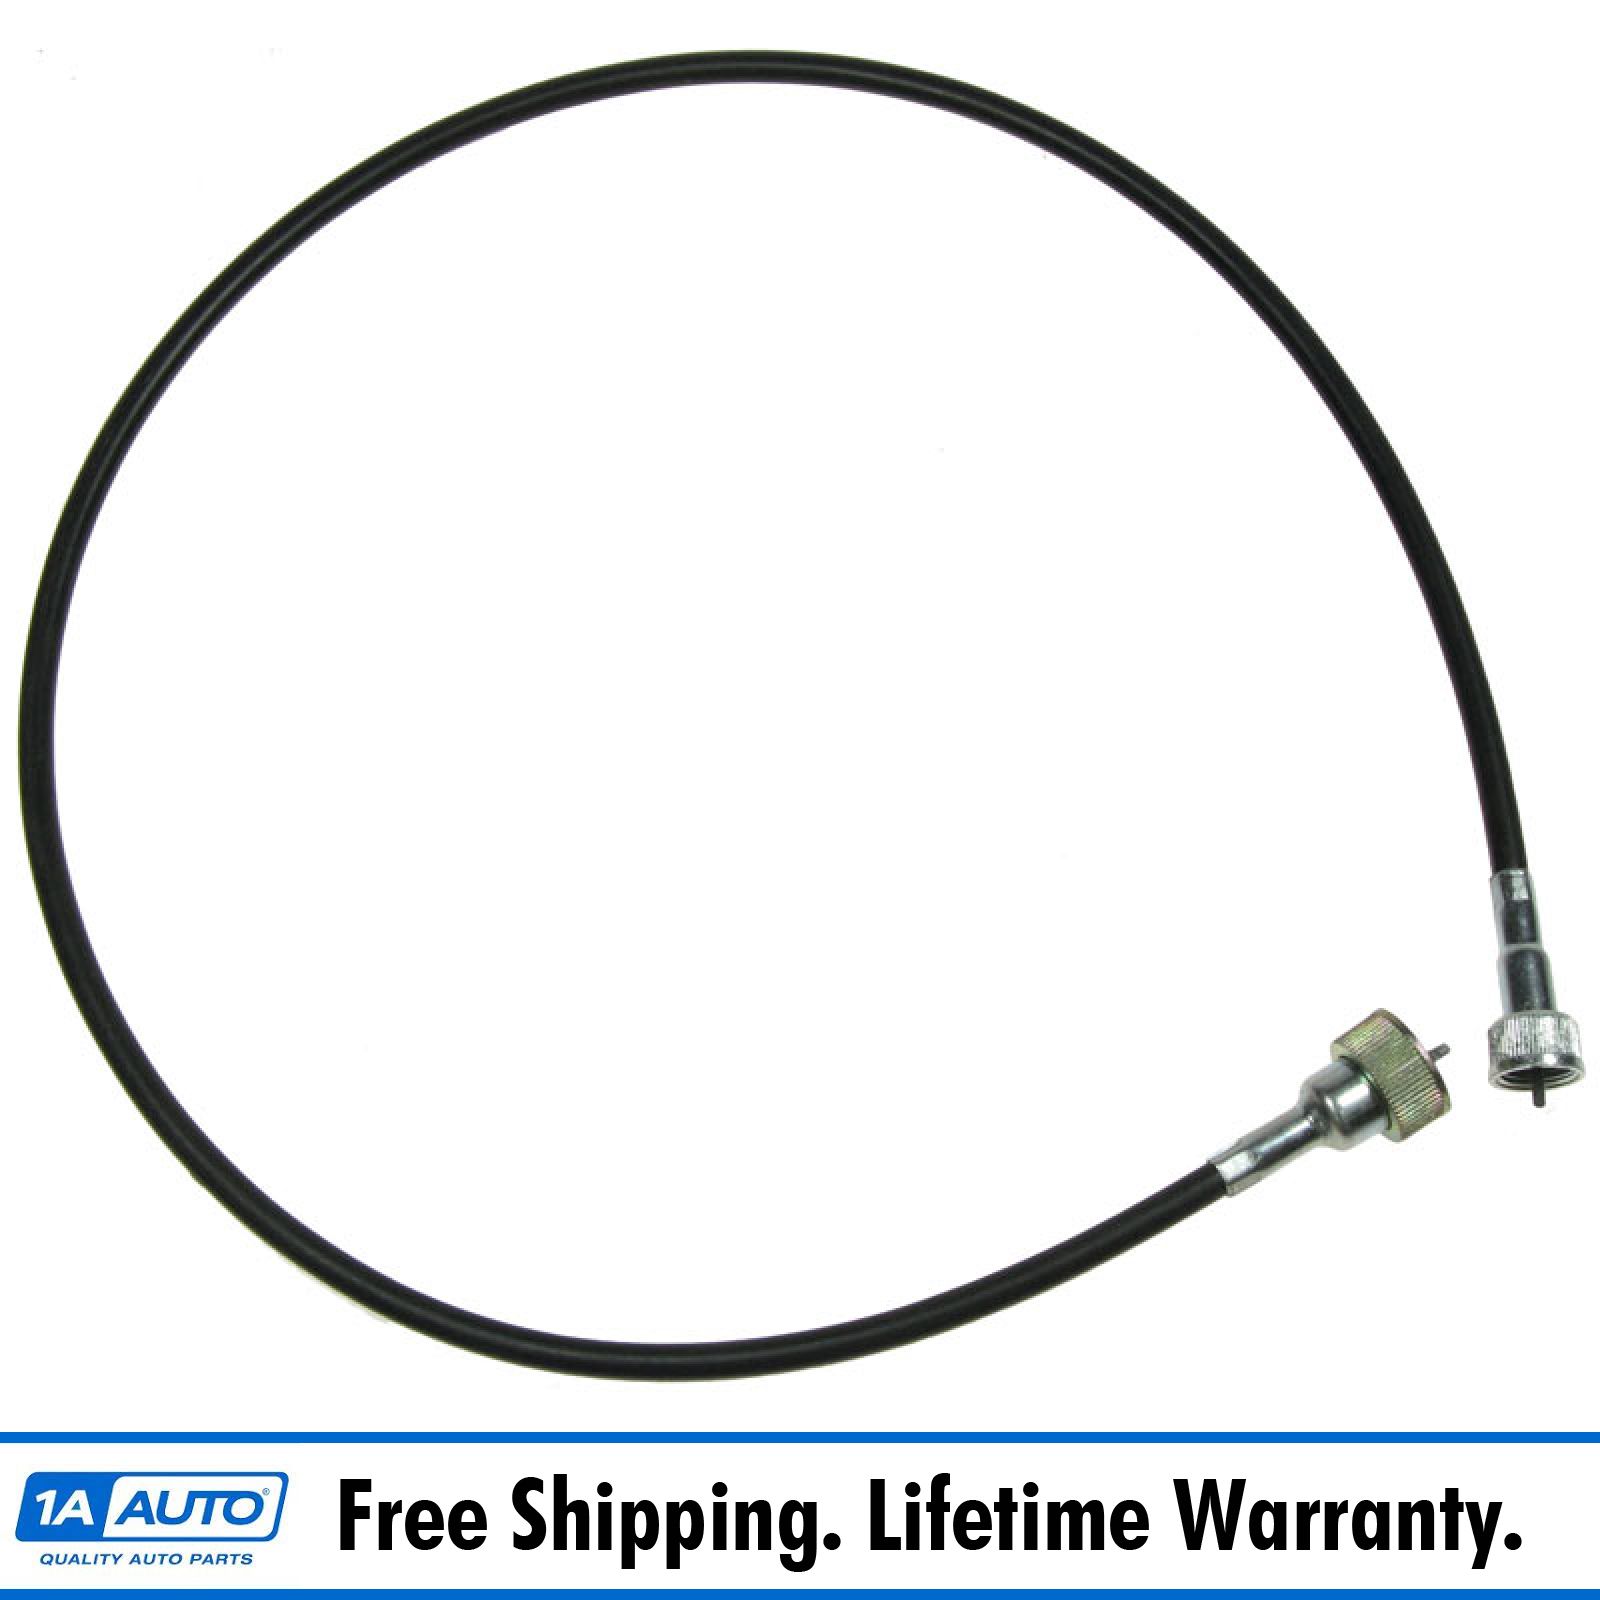 Chrysler speedometer cable